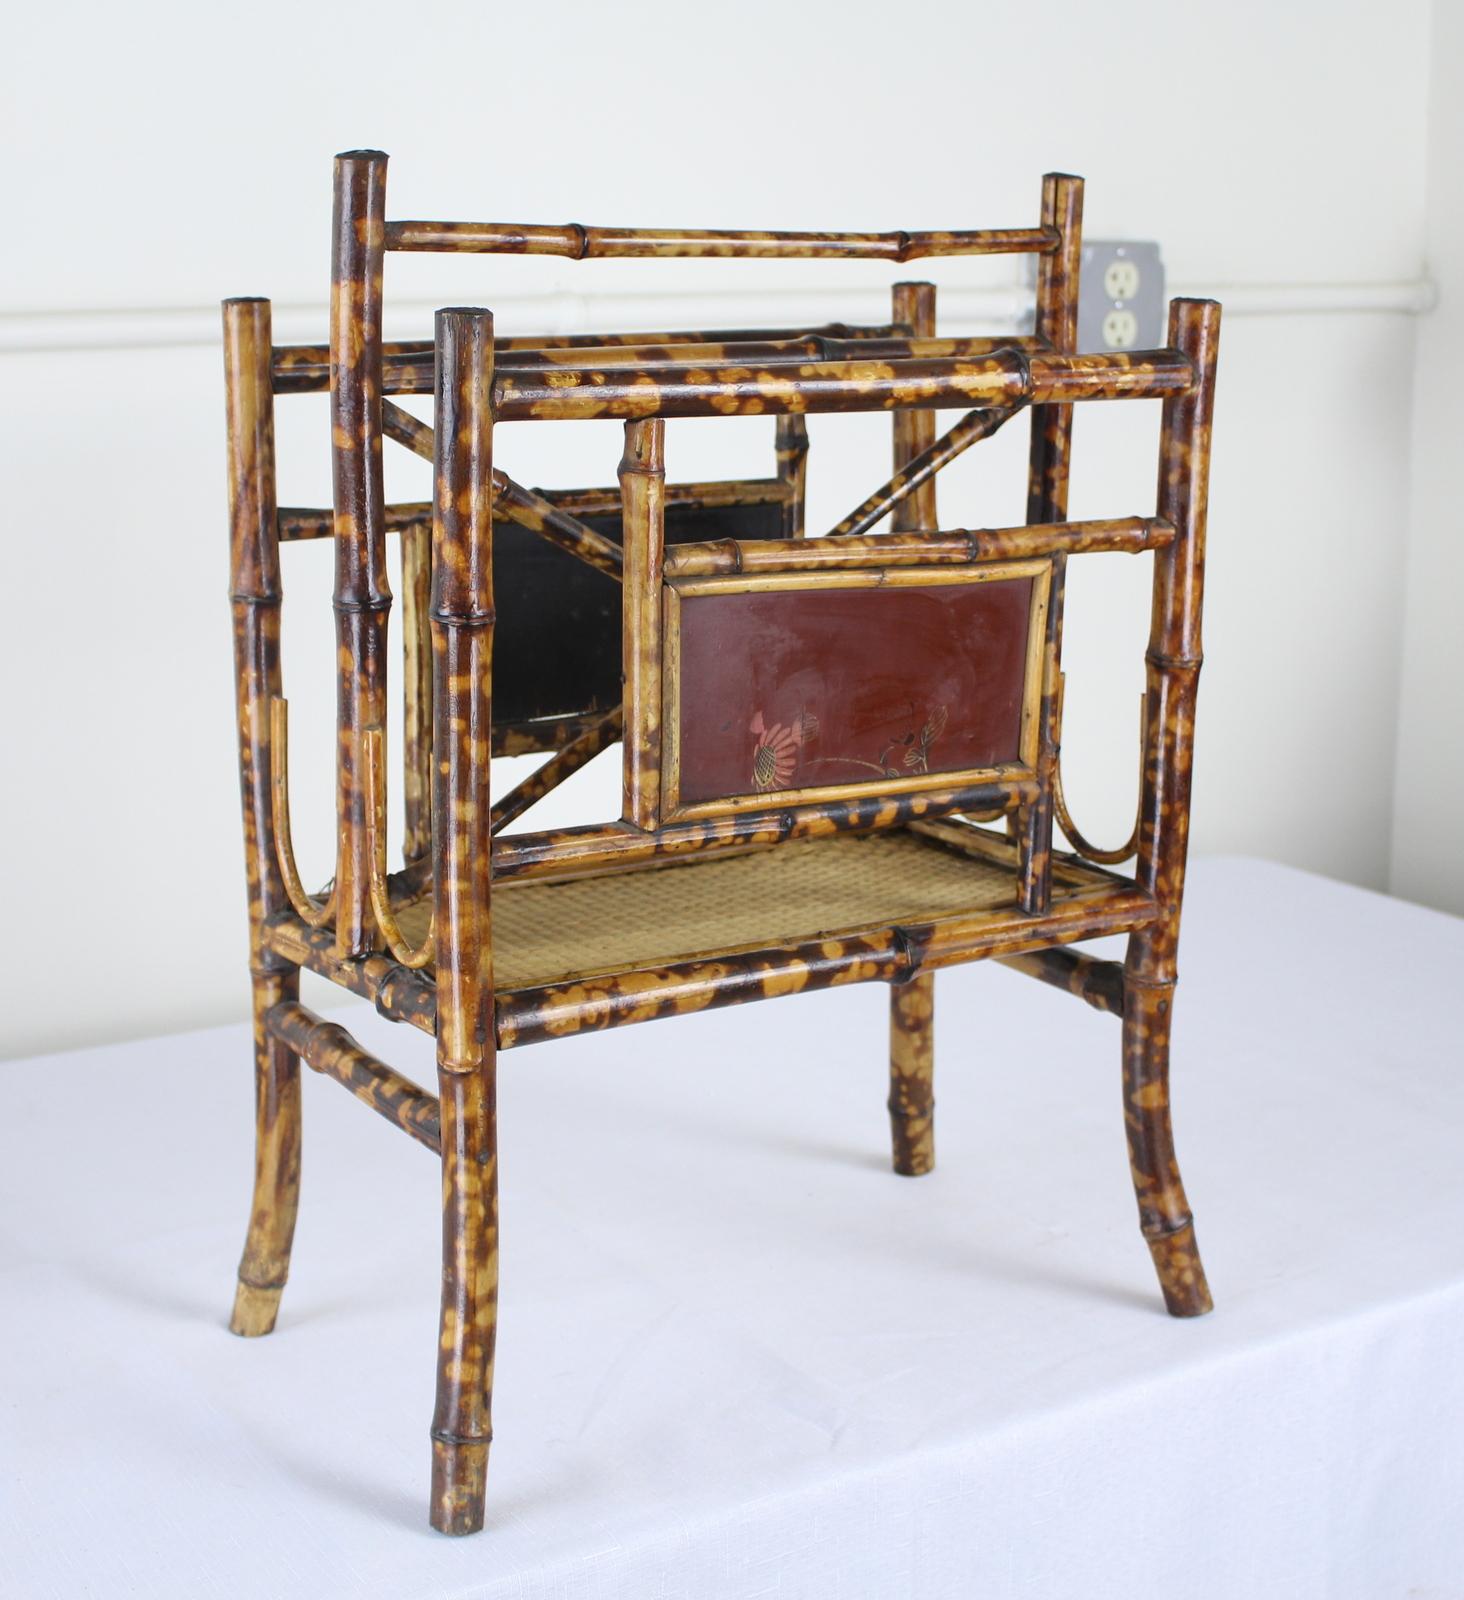 Antique bamboo canterbury from England, originally designed to hold sheet music, but perfect as a magazine rack. There is some wear on the original lacquer chinoiserie.